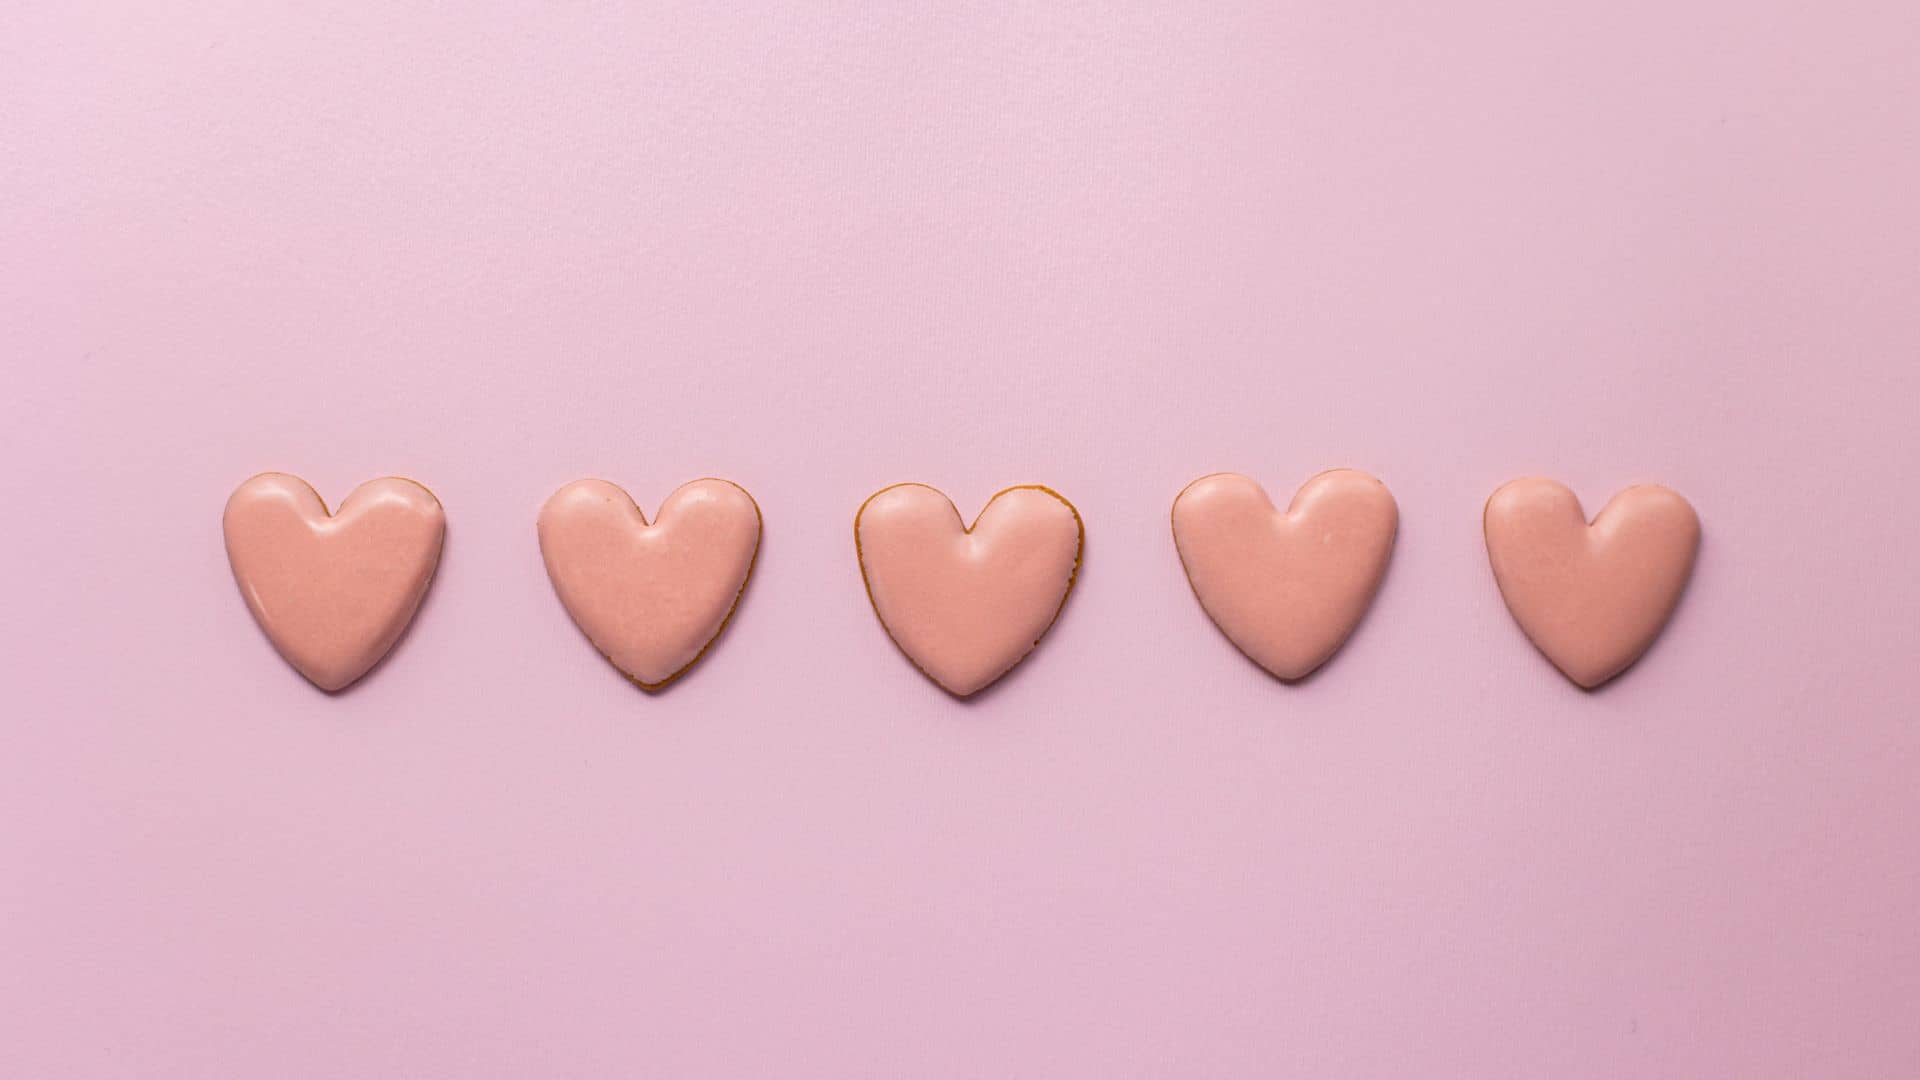 Patchology Self-Care Valentine's Date Ideas Based on Your Love Language